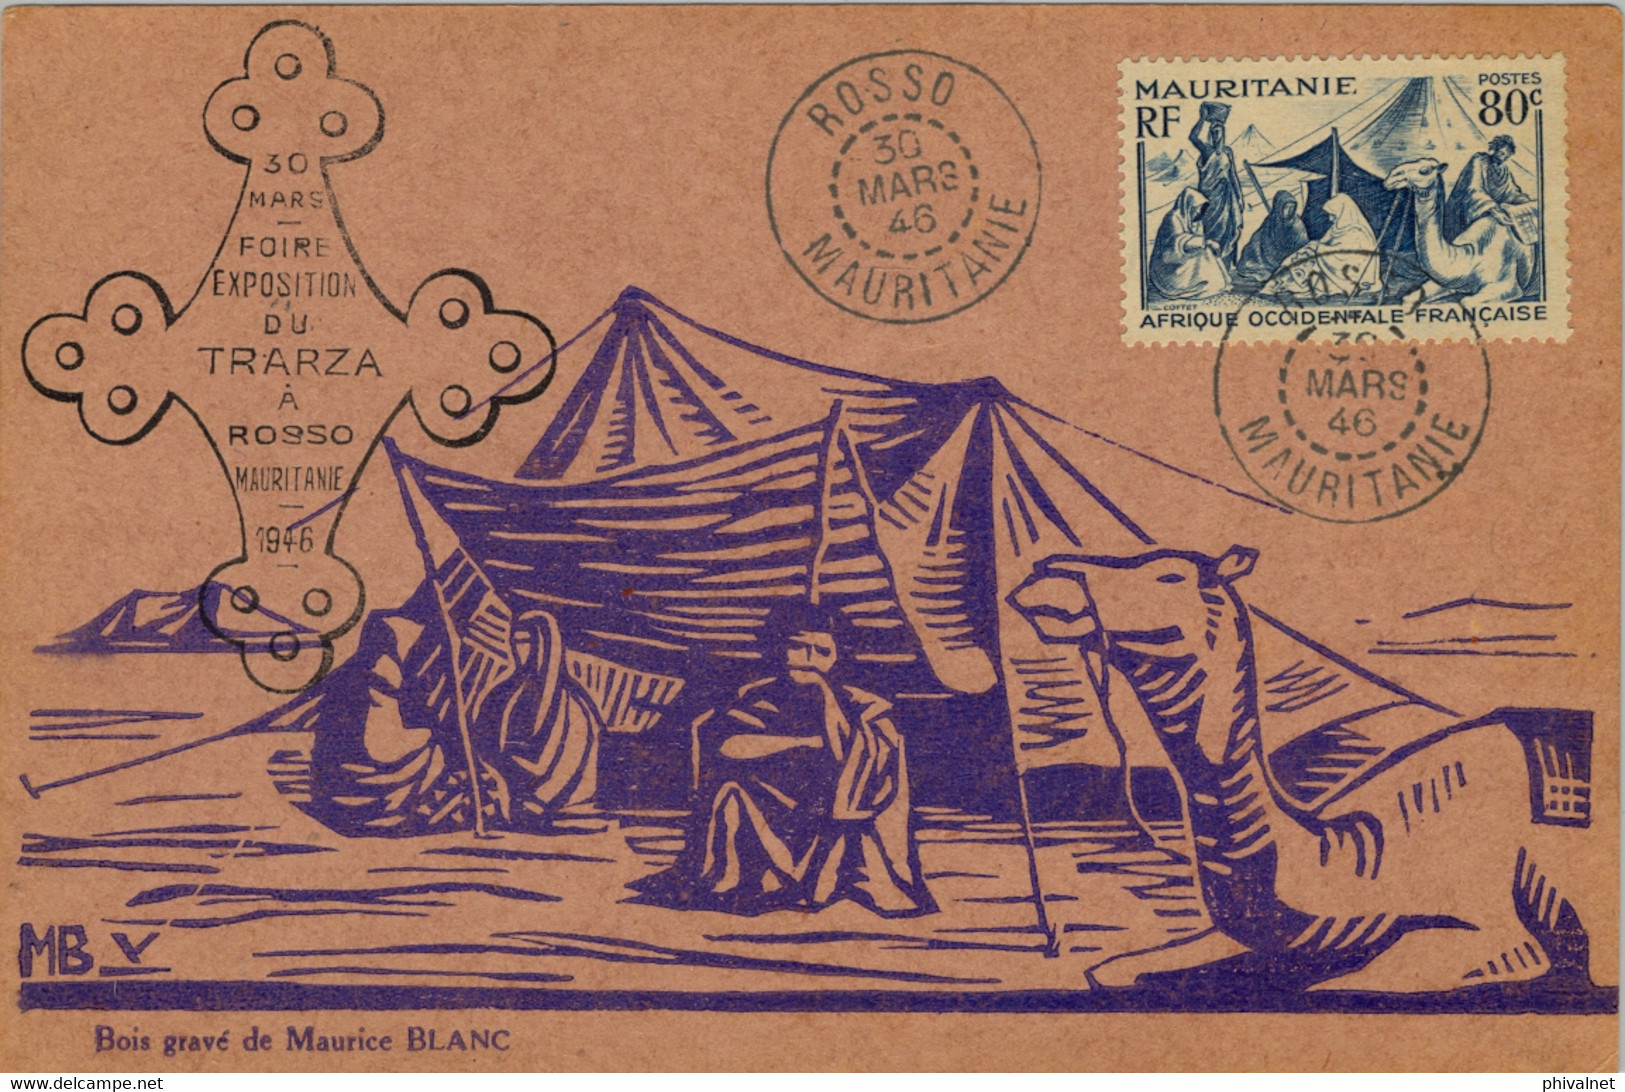 1946 MAURITANIE , FOIRE EXPOSITION DU TRARZA A ROSSO , MAT. DE ROSSO , FRANQUEO 80 CTS. - Covers & Documents